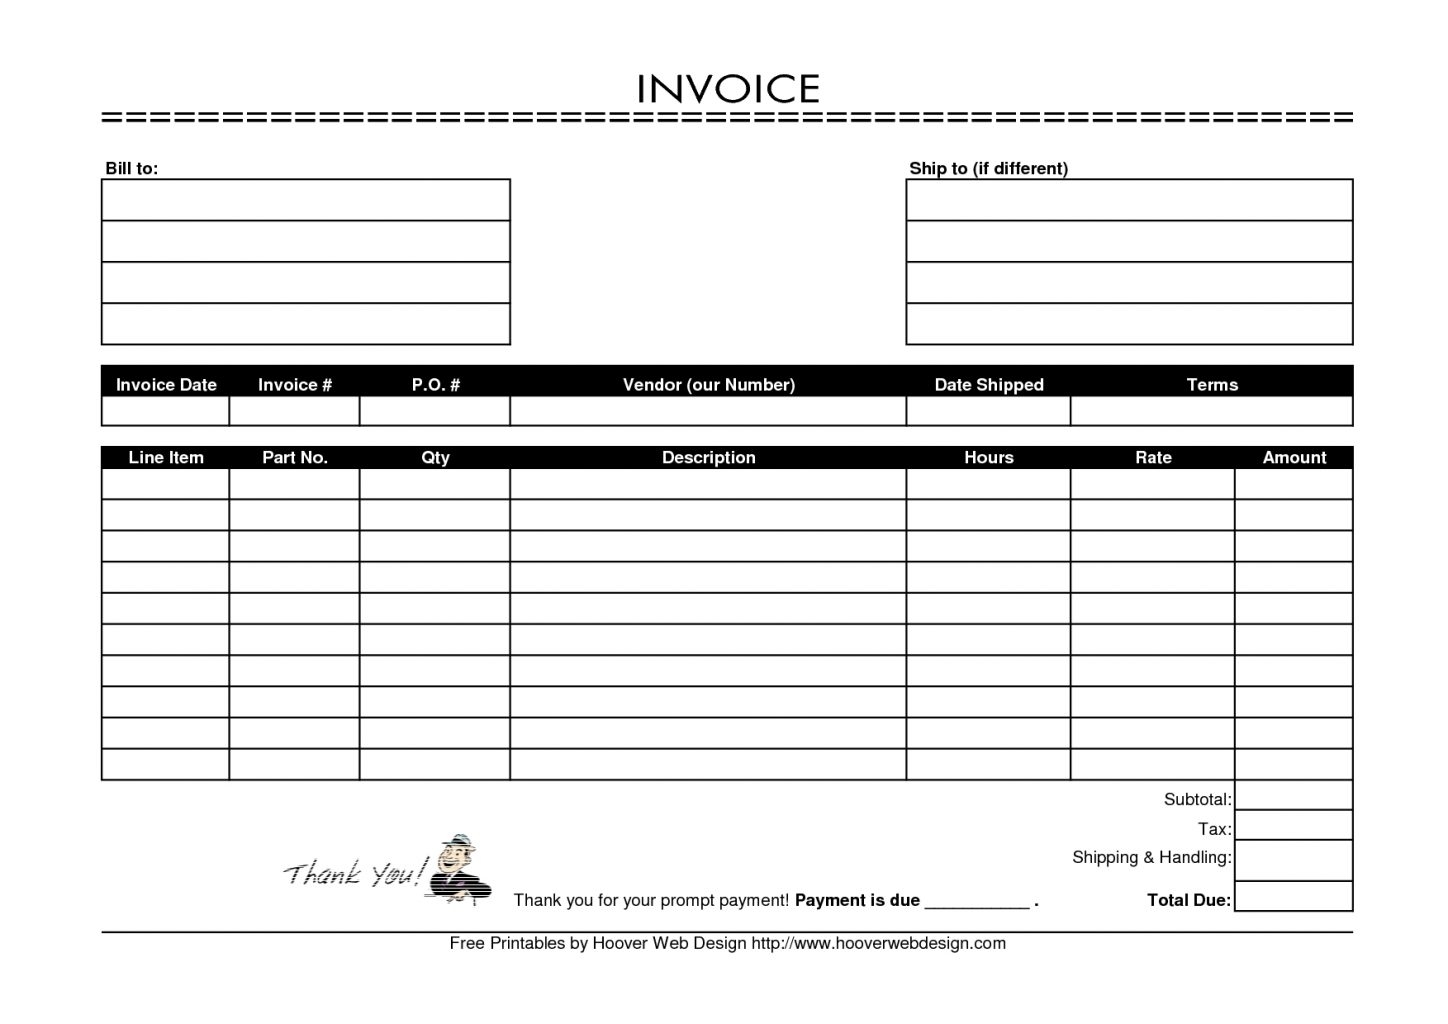 create a free invoice free printable invoice template 9 examples of printable invoice 1448 X 1024